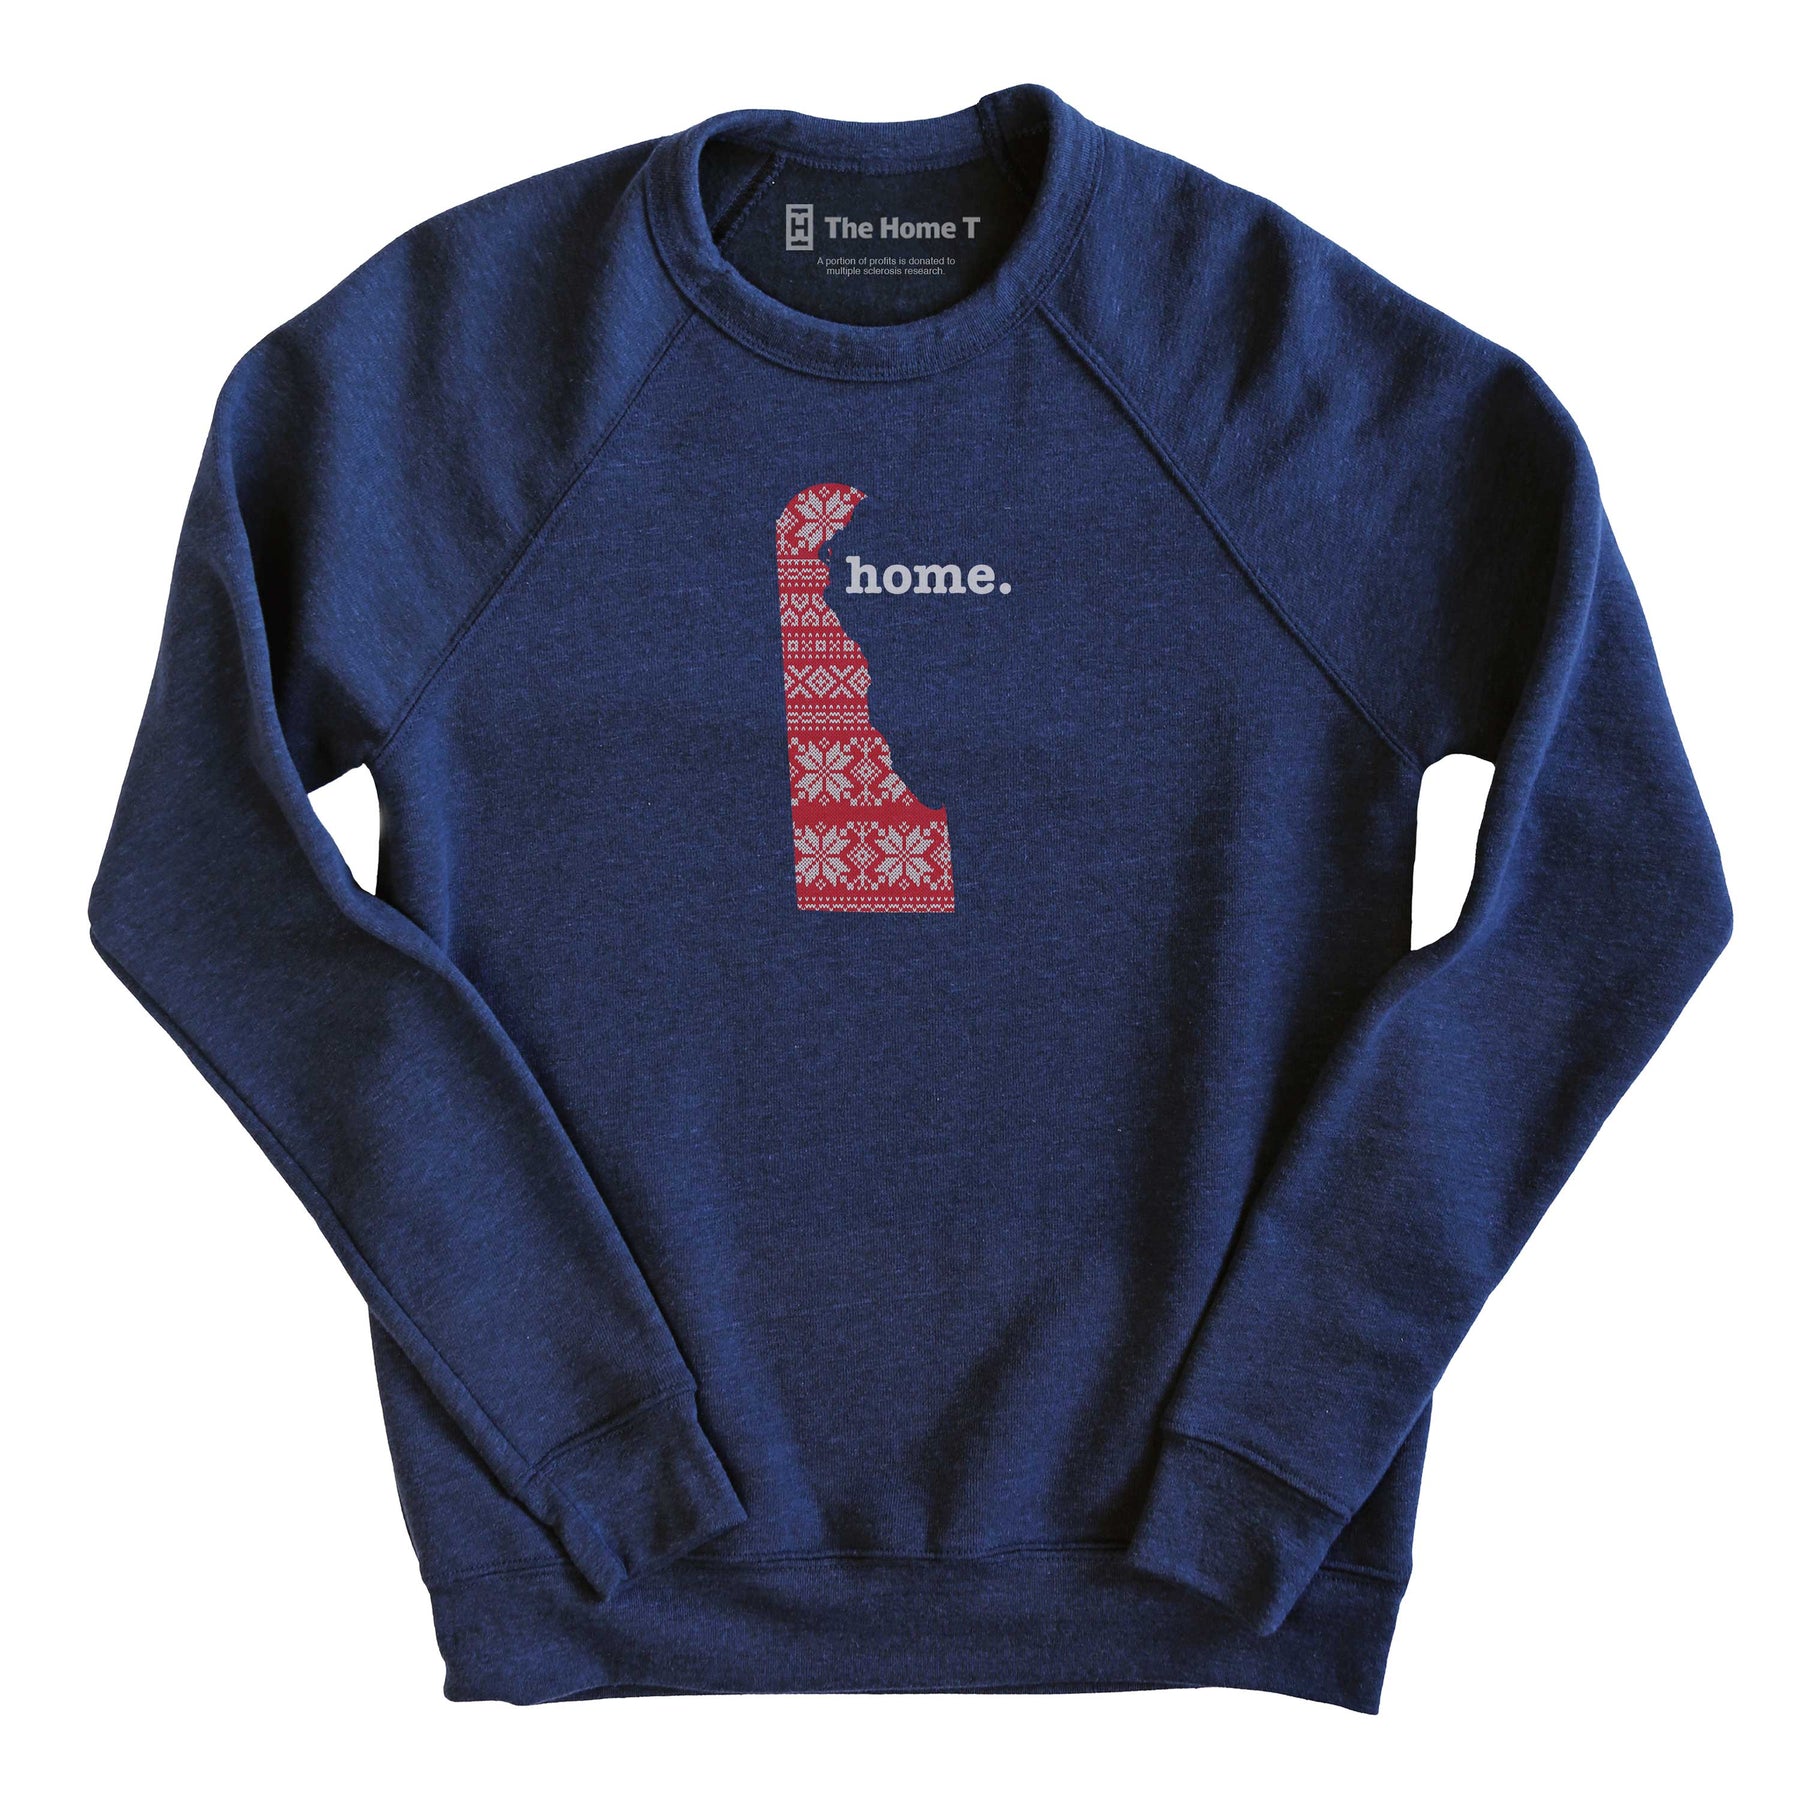 Delaware Christmas Sweater Pattern Christmas Sweater The Home T XS Navy Sweatshirt